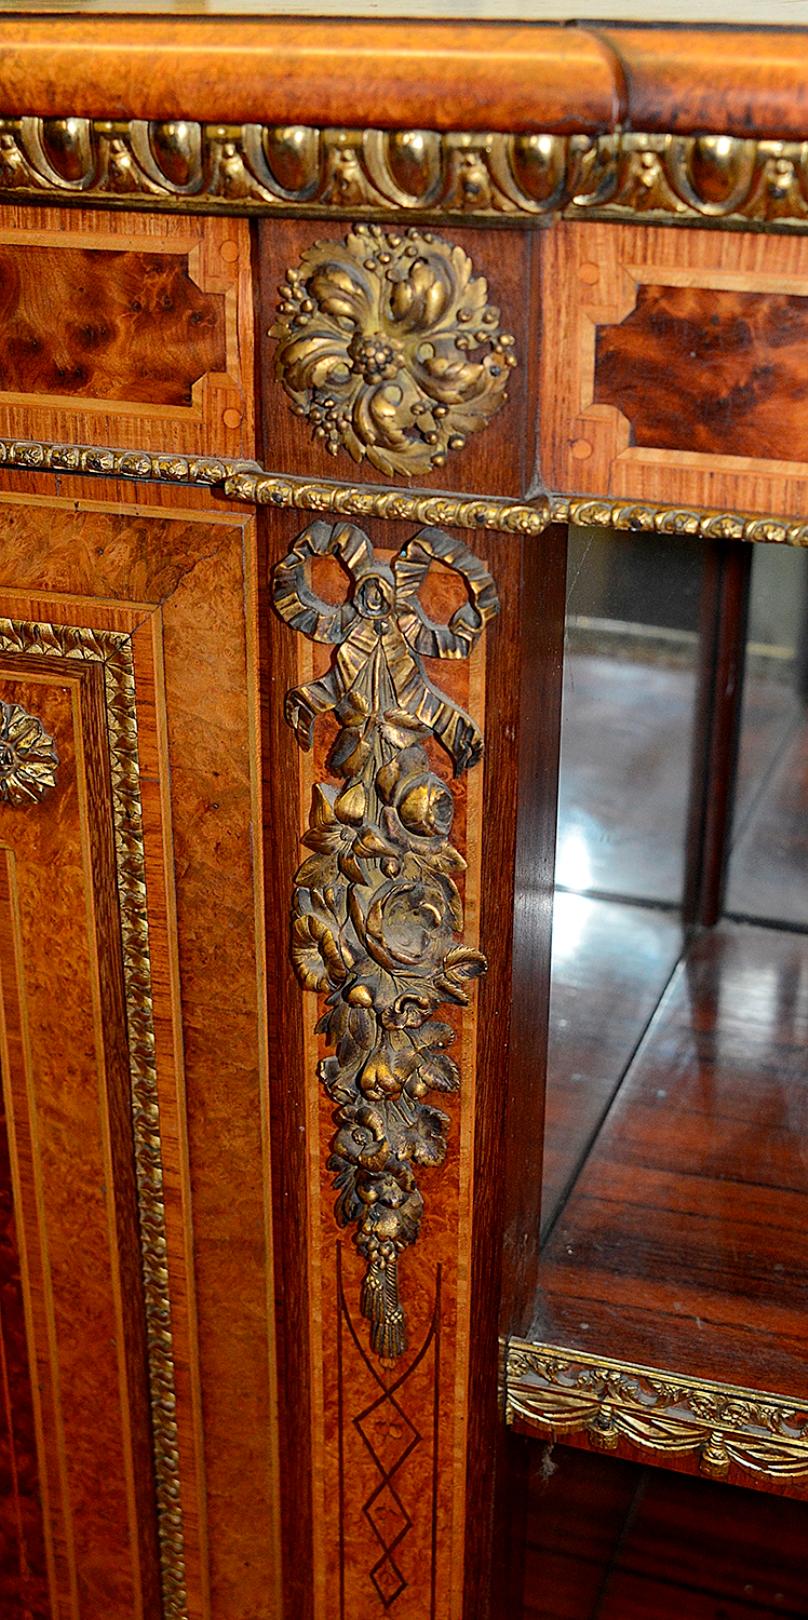 English Fine Quality 19th Century Inlaid Credenza / Side Cabinet, by Lamb of Manchester